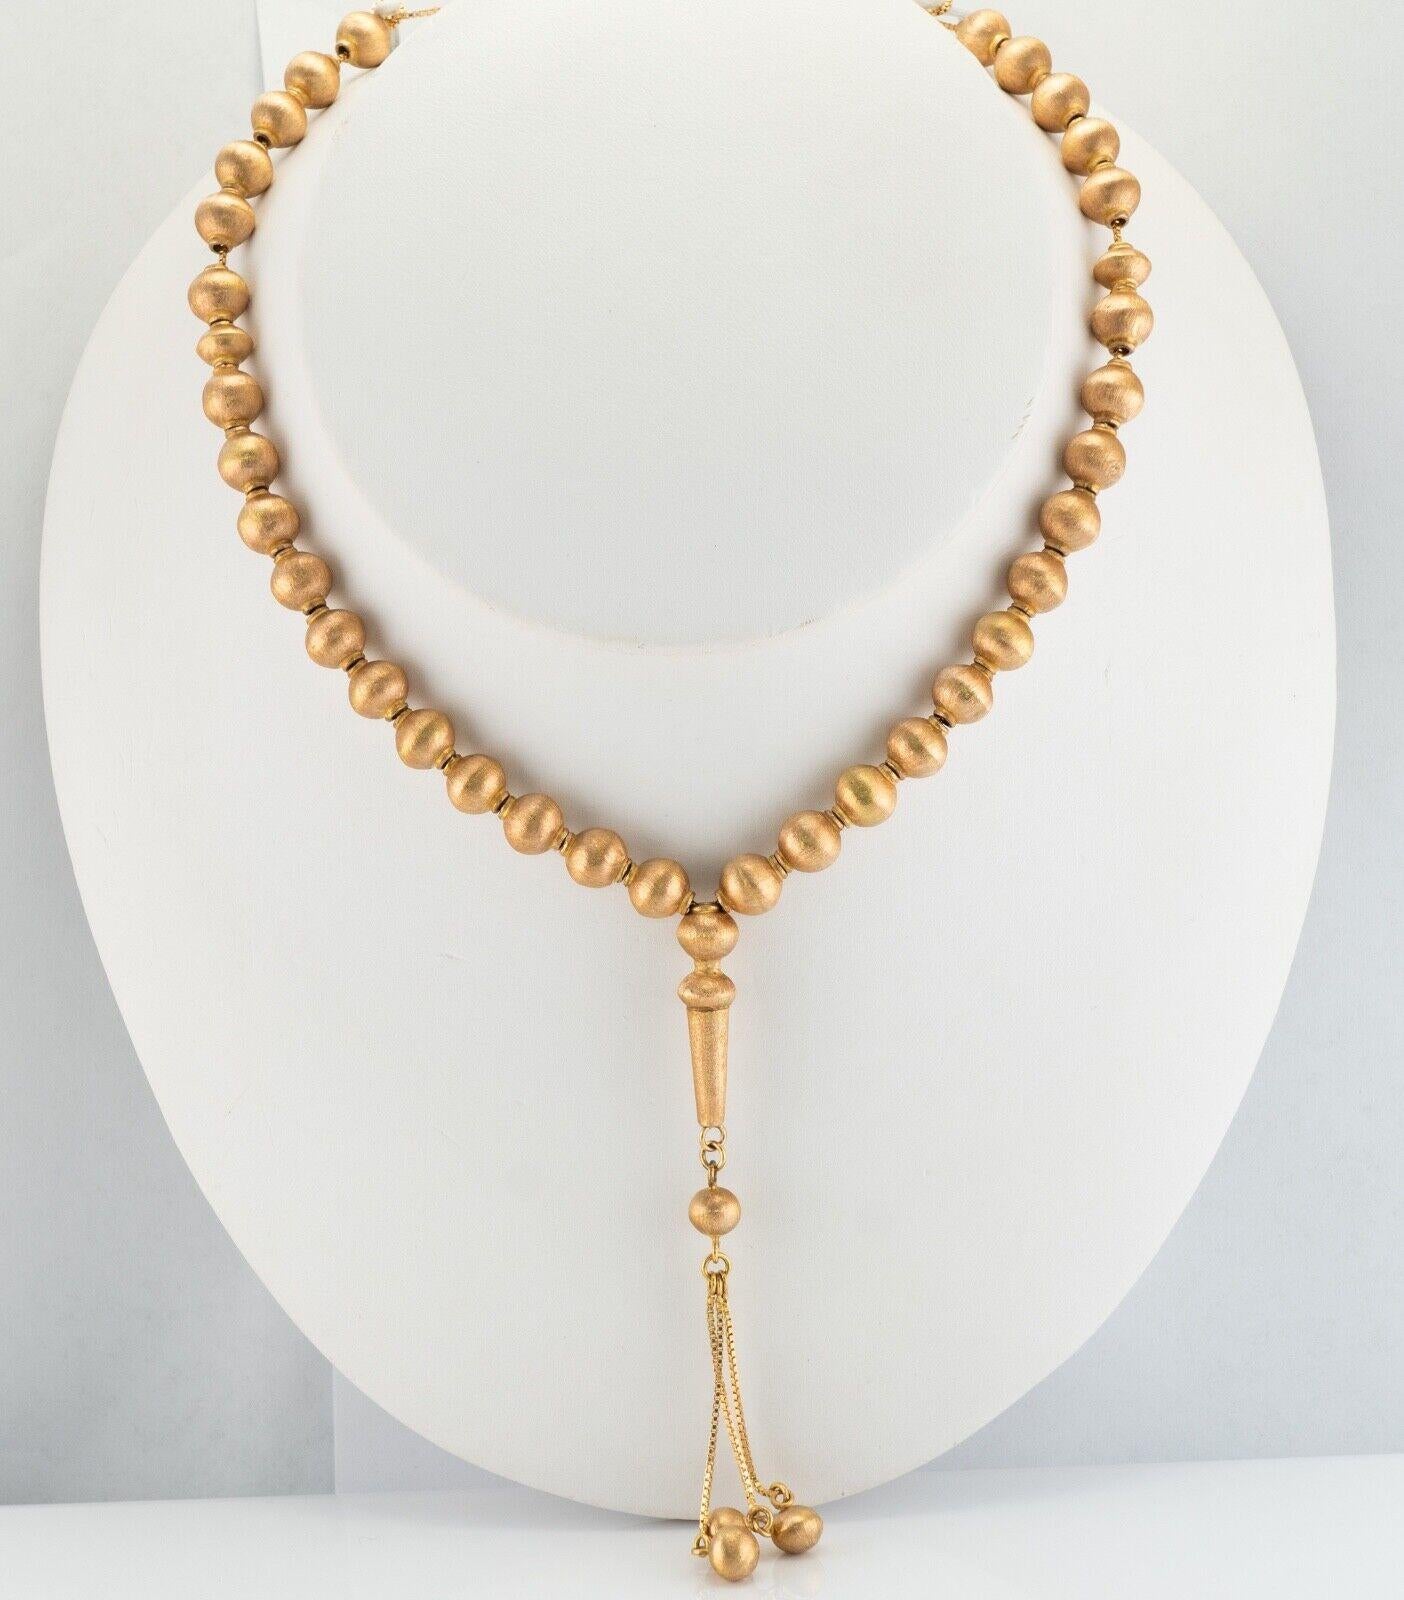 14K Gold Beaded Necklace Gold Bead Tassels

This very unusual vintage necklace is finely crafted in solid 14K Yellow Gold. There are 36 golden beads in the necklace and the bottom drop part has 5 more beads. The beads measure 7mm and 5mm on the